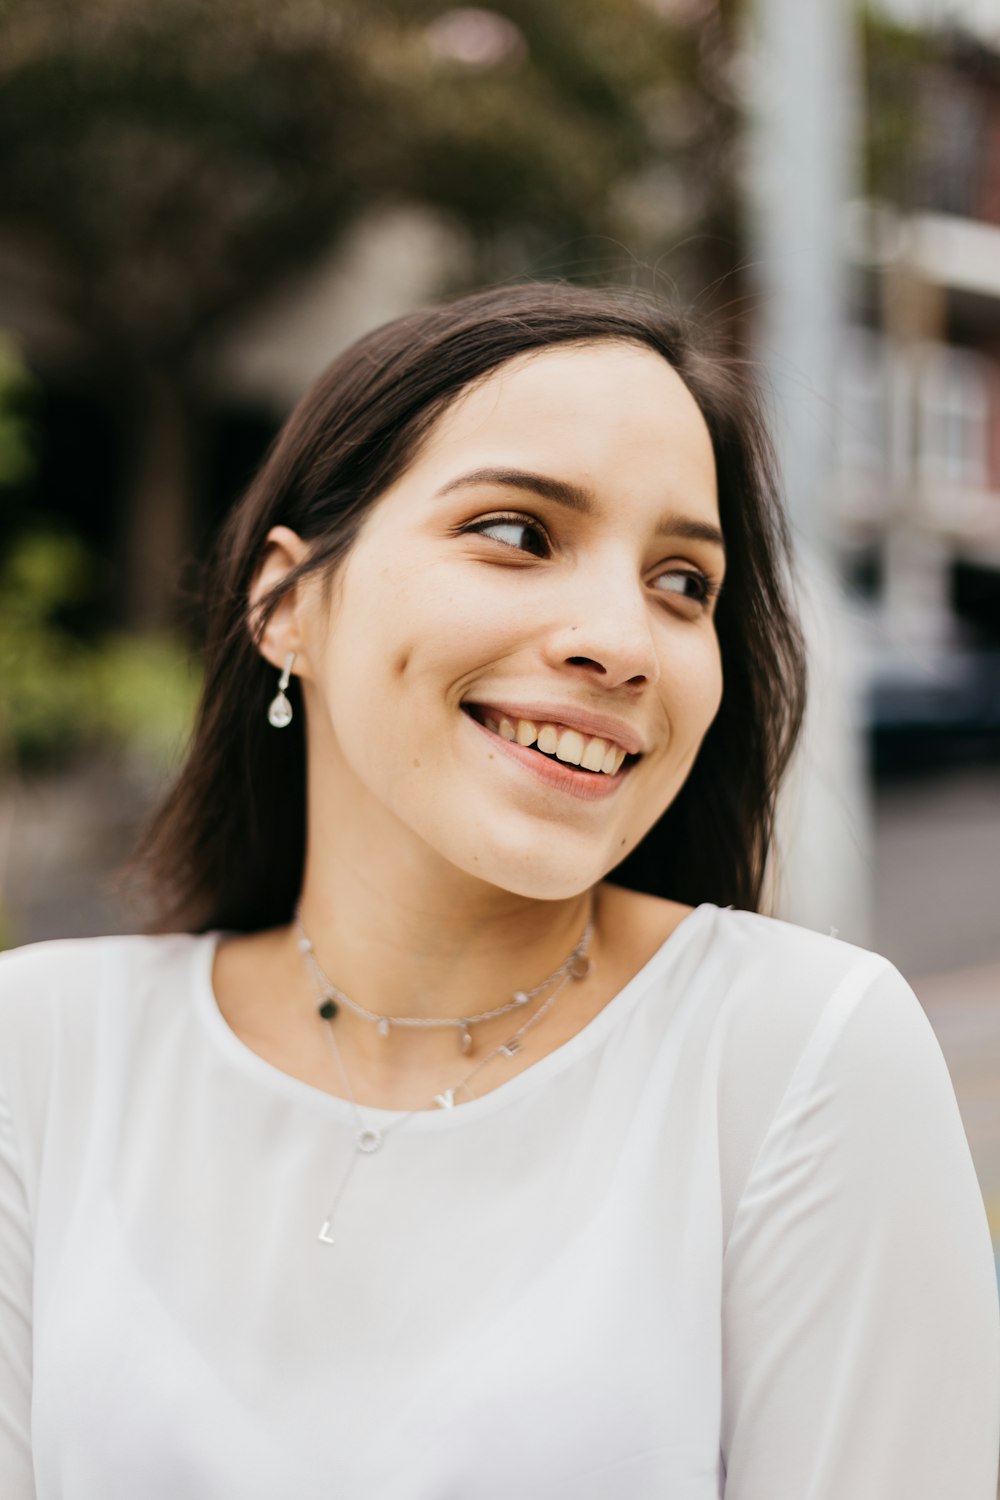 Best Dimple Pictures [HD] | Download Free Images on Unsplash